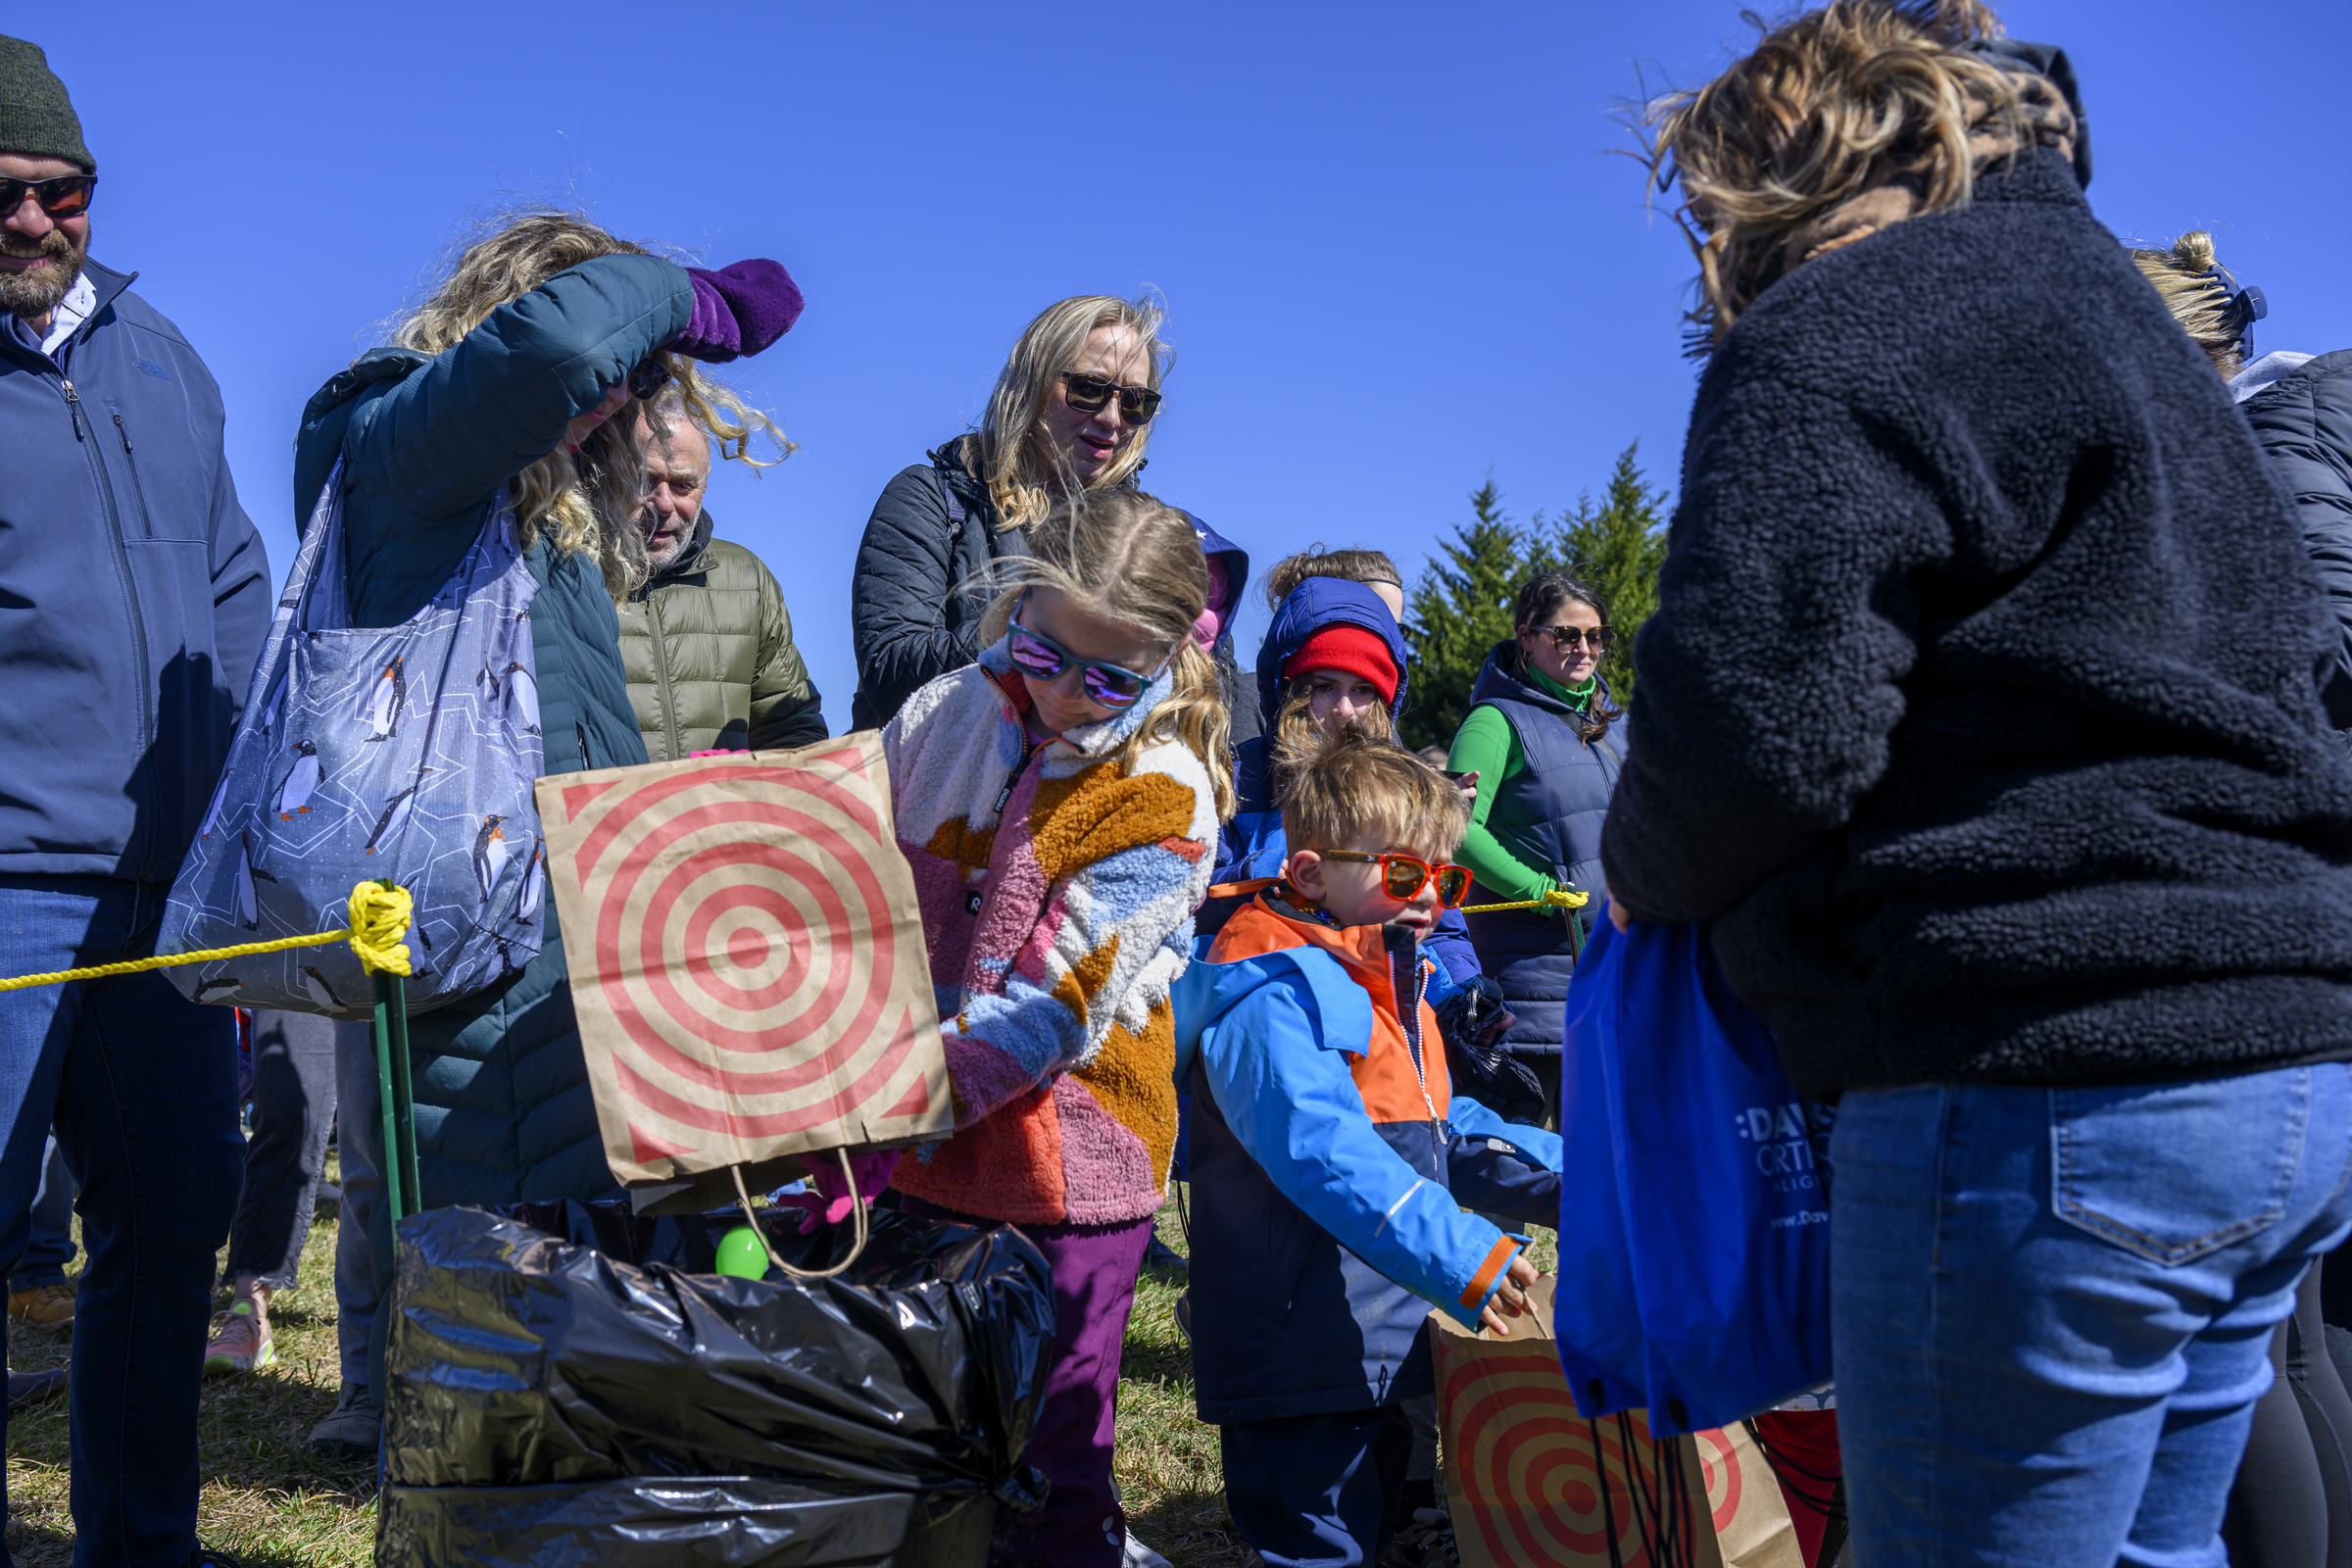 Clara Clark puts her eggs into a collectiton bin before receiving her gift bag during the Coppermine Eggstravaganza at Cascade Park in Hampstead. (Thomas Walker/Freelance)